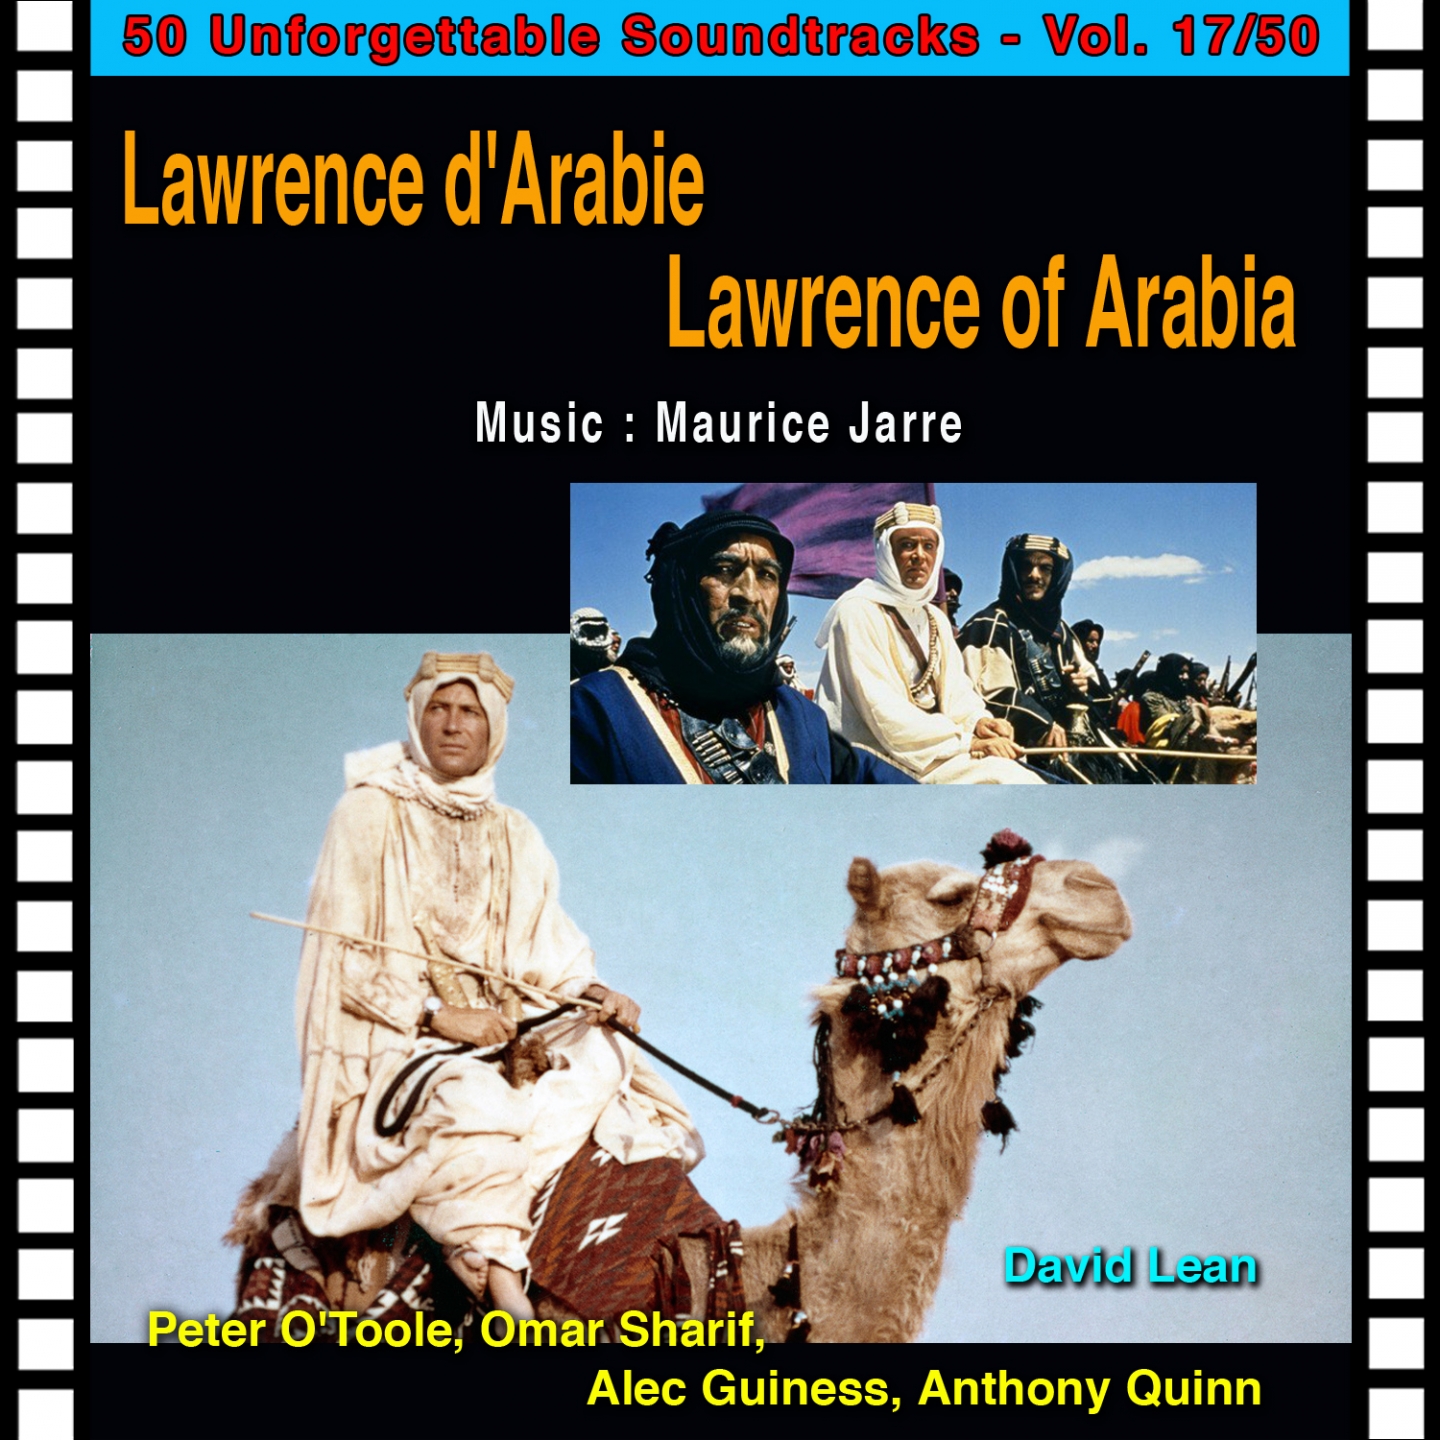 Lawrence of Arabia: Arrival at Auda's Camp (Maurice Jarre)